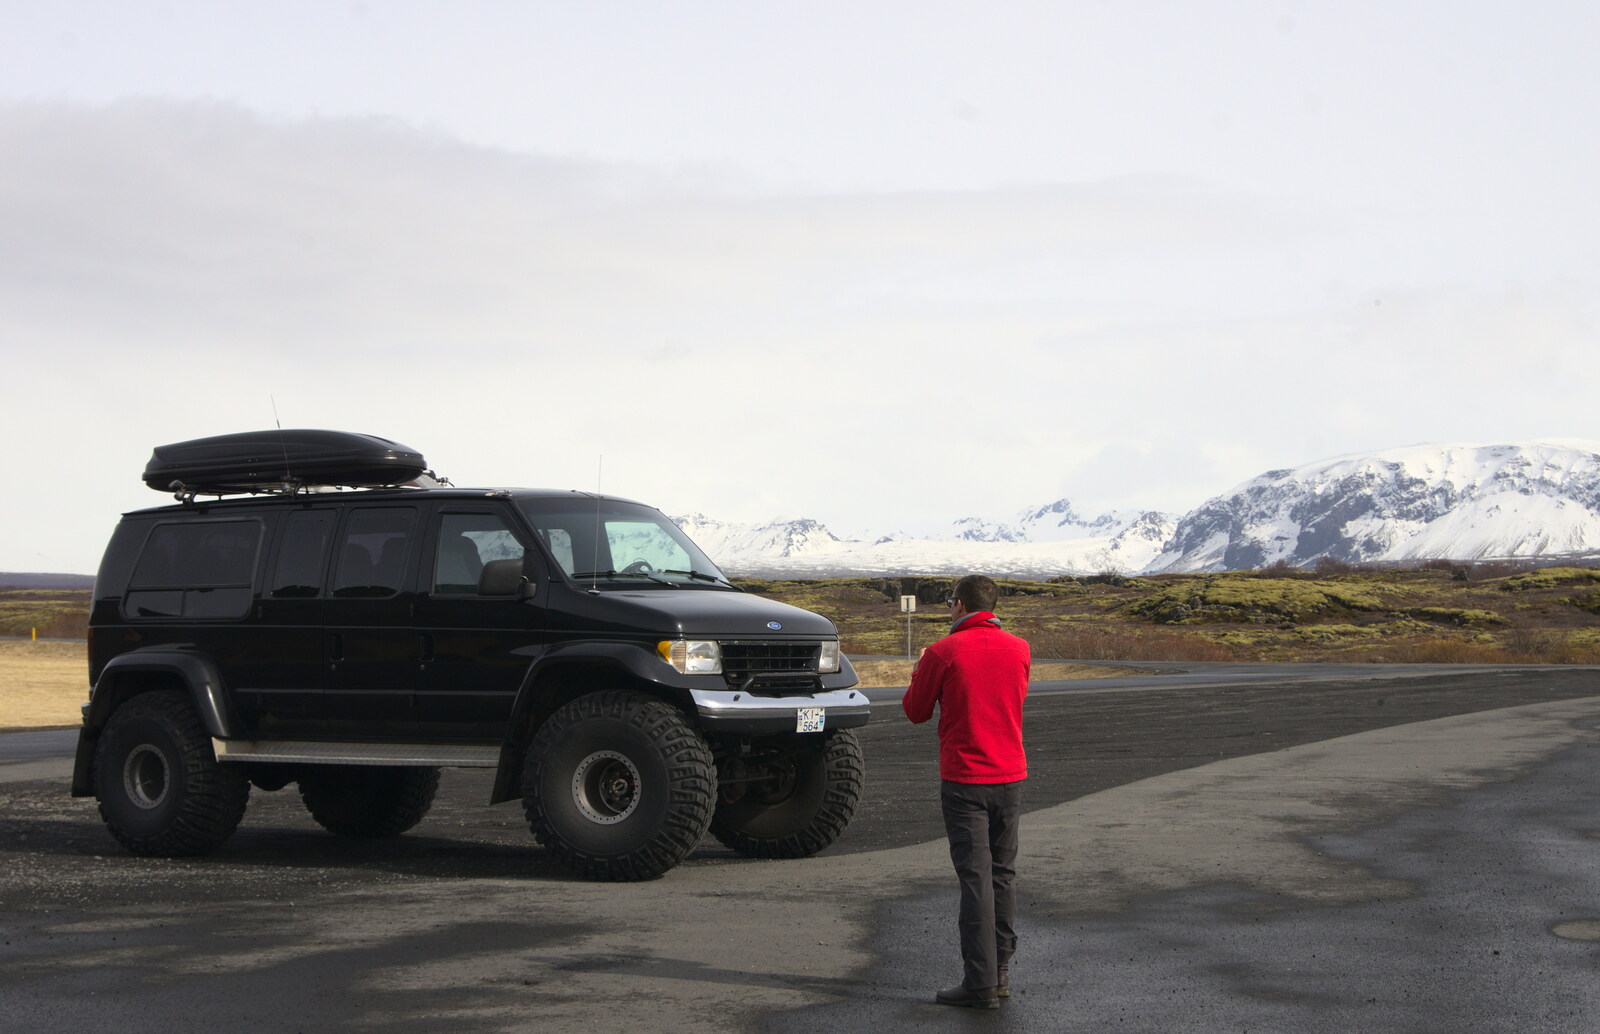 Some dude inspects a monster truck from The Golden Circle of Ísland, Iceland - 22nd April 2017